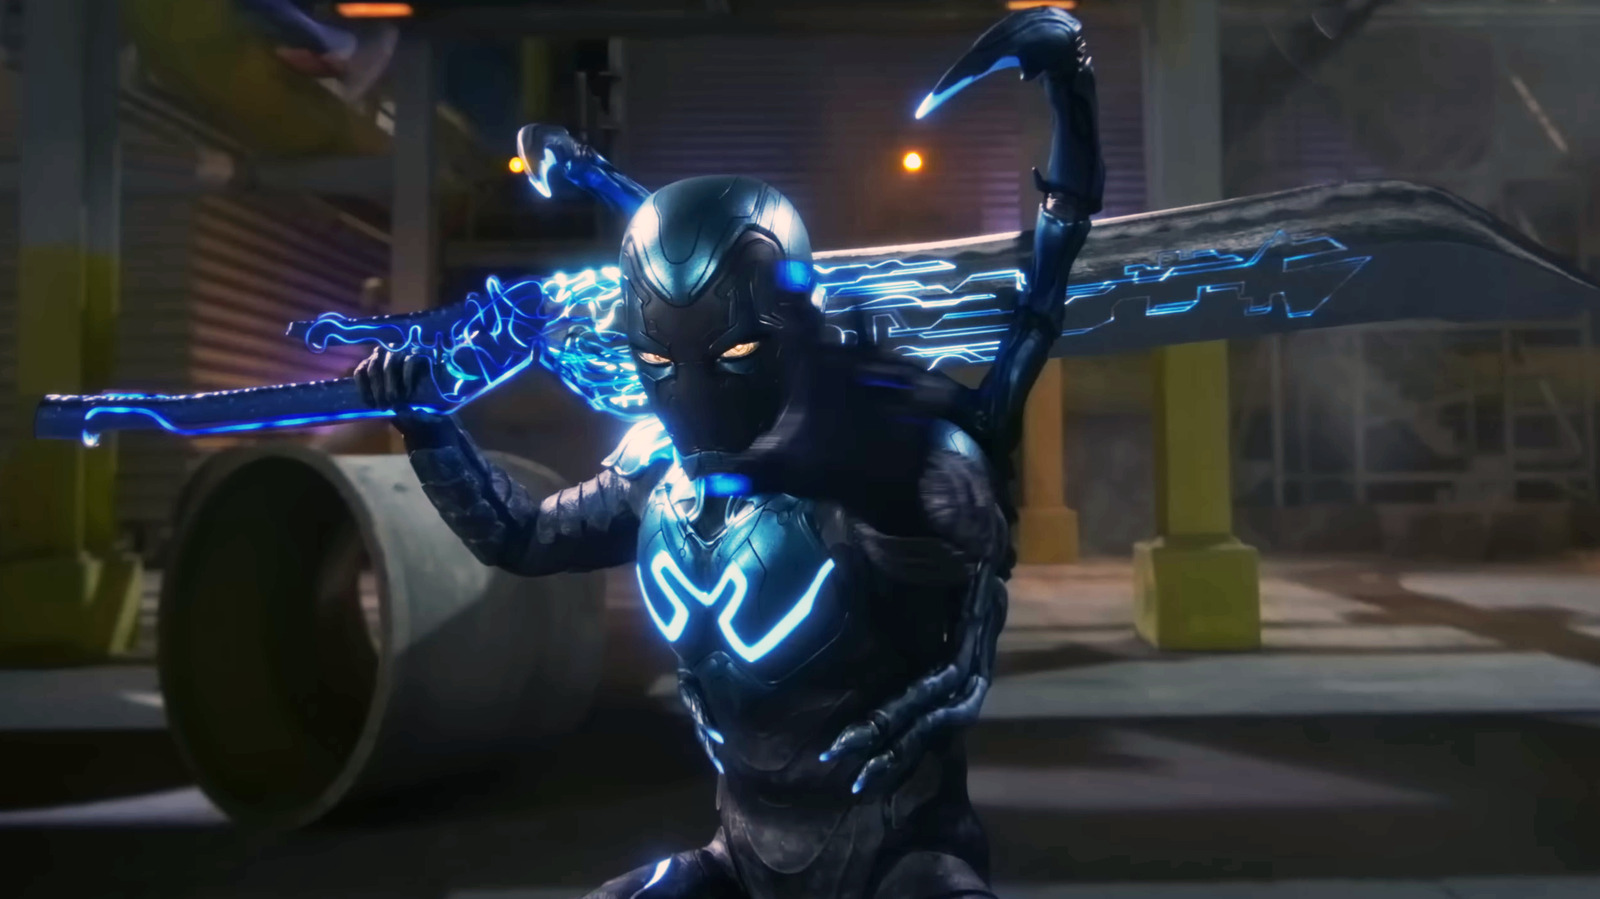 Blue Beetle: DCU film was inspired by Injustice 2